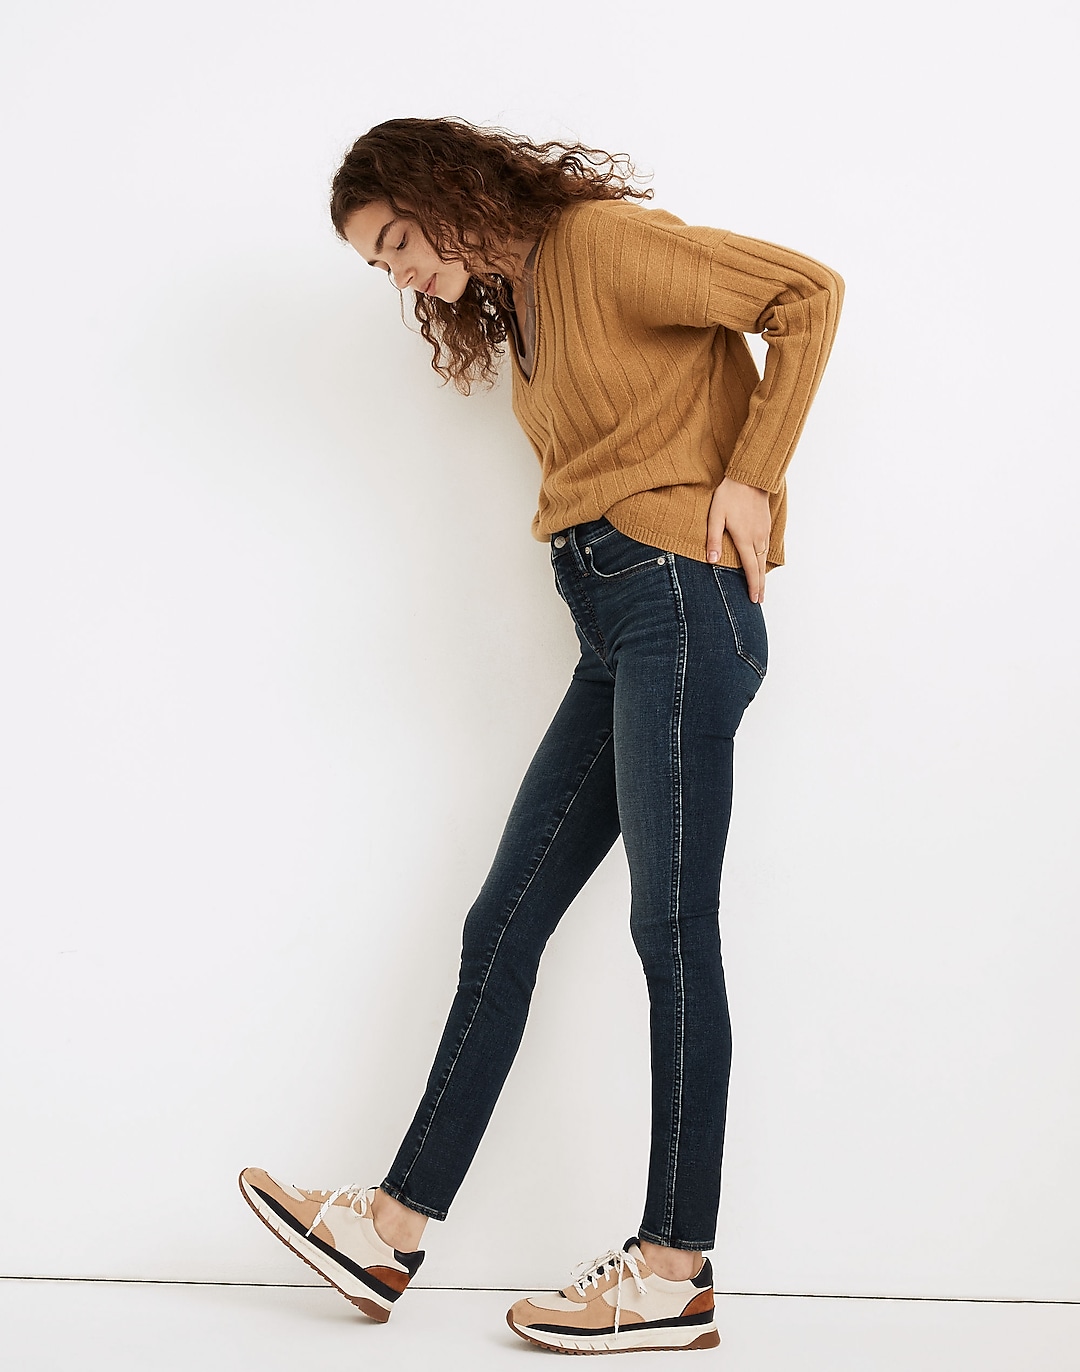 Petite Stovepipe Full-Length Jeans in Vinter Wash: Instacozy Edition